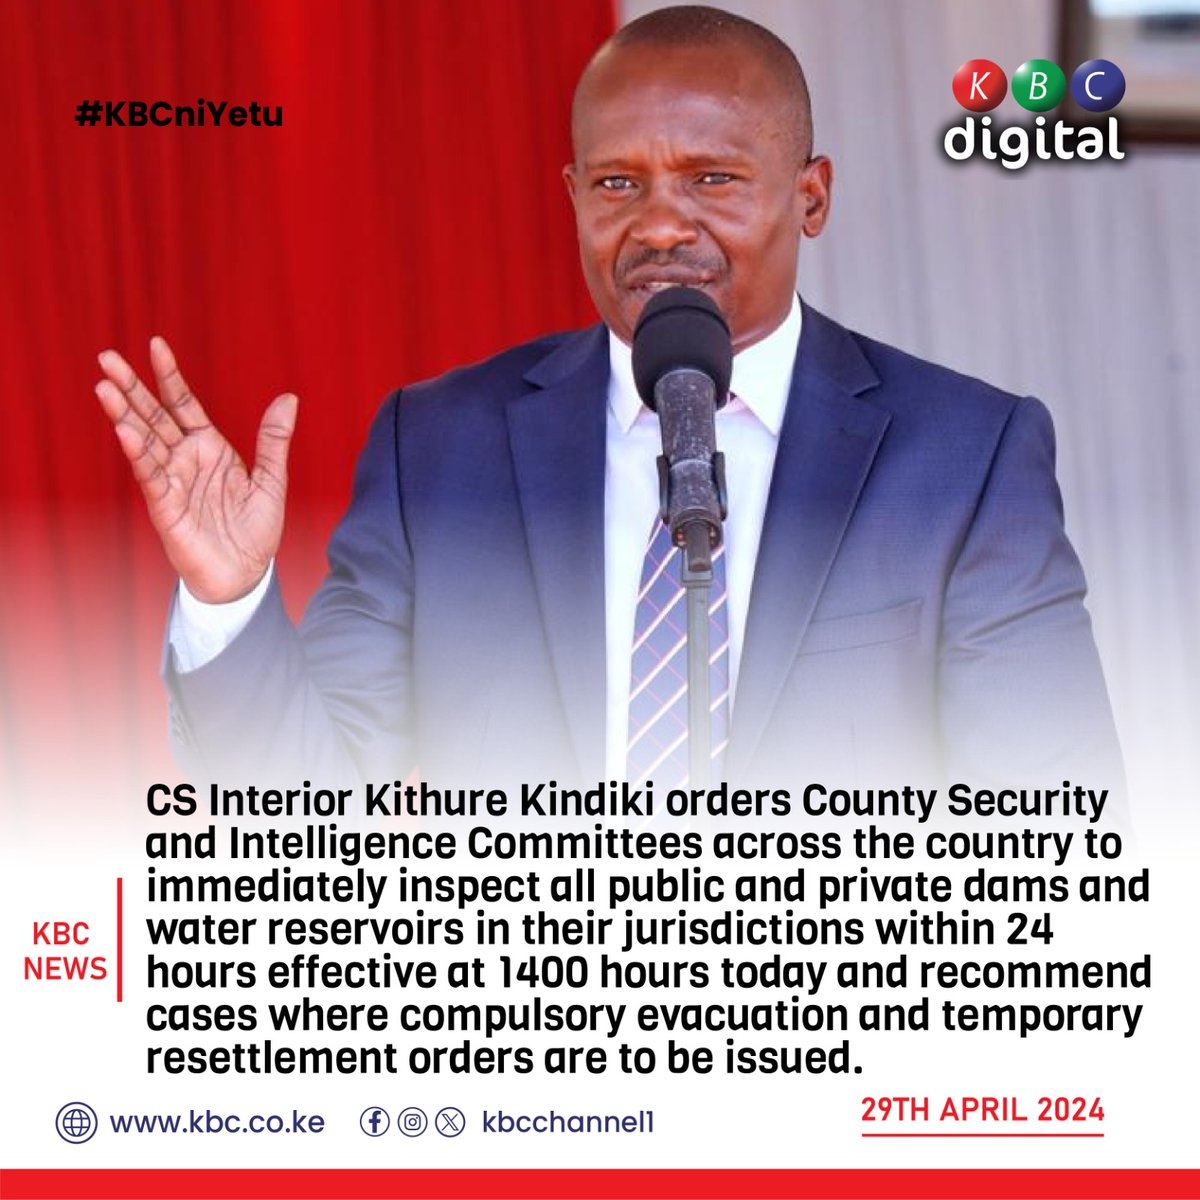 CS Interior Kithure Kindiki orders County Security and Intelligence Committees across the country to immediately inspect all public and private dams and water reservoirs in their jurisdictions within 24 hours effective at 1400 hours today. #KBCniYetu^EM